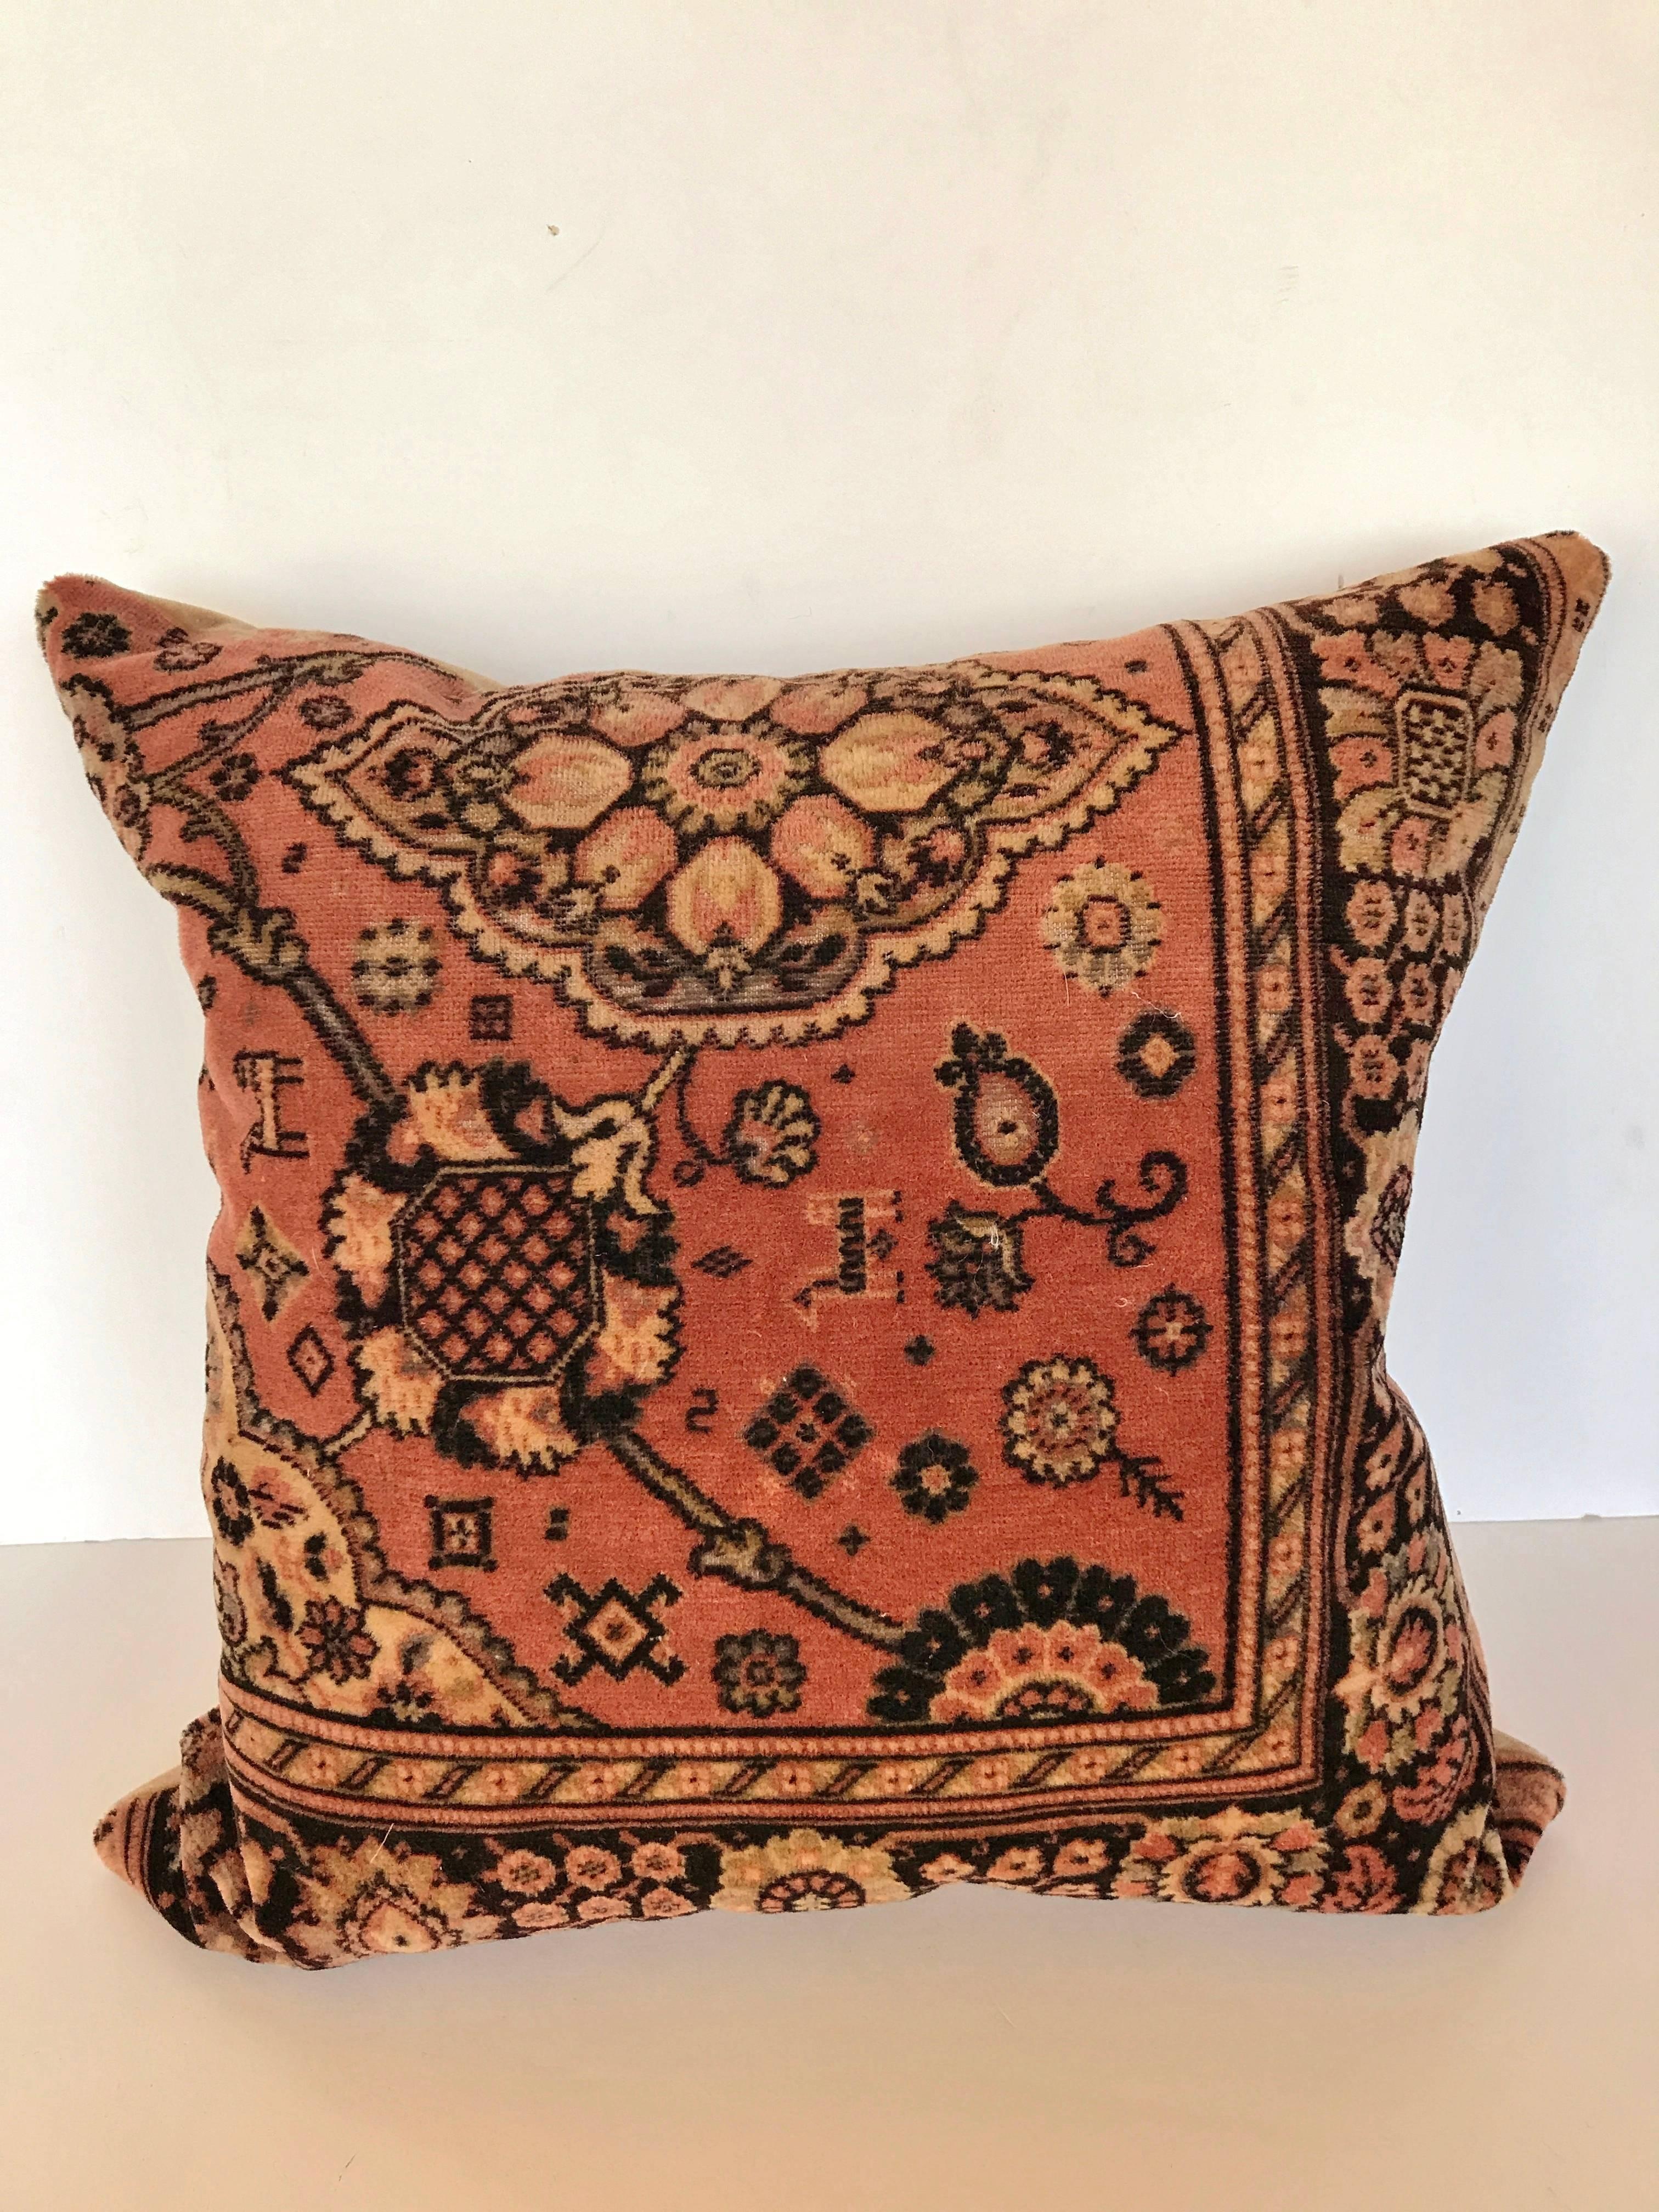 Custom Pillow cut from a Vintage wool Mohair textile from the Netherlands.  It has a soft hand and with an oriental rug design.  It was used on the dining table during the winter months covered with a white linen cloth while dining.  The pillow is